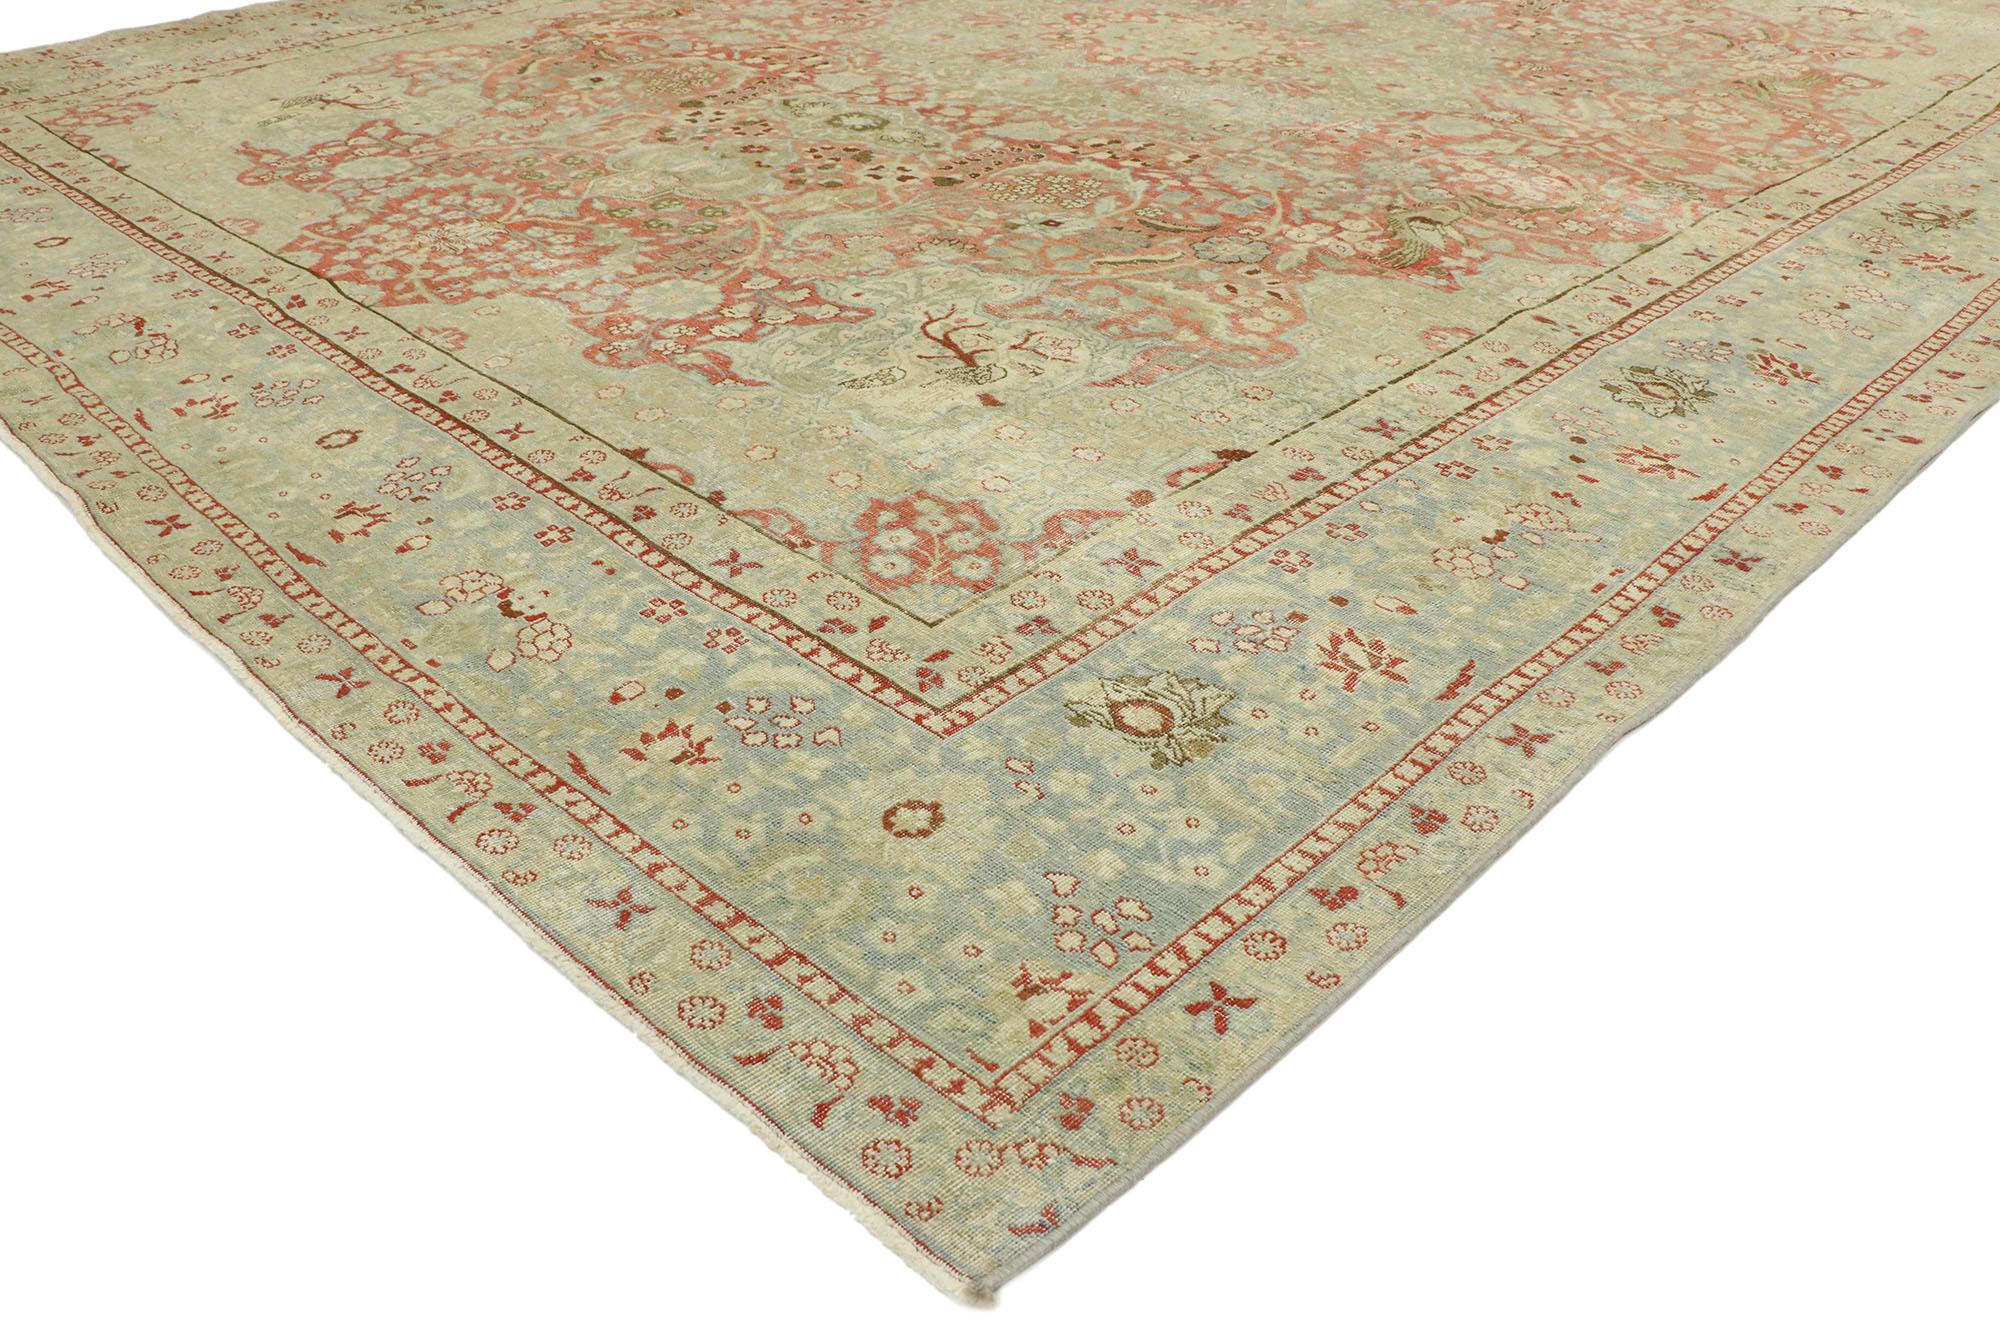 53165, distressed antique Persian Tabriz rug with Rustic English Cottage style. With it's timeless elegance and regal charm combined with rustic sensibility, this hand knotted wool distressed antique Persian Tabriz rug features a round concentric